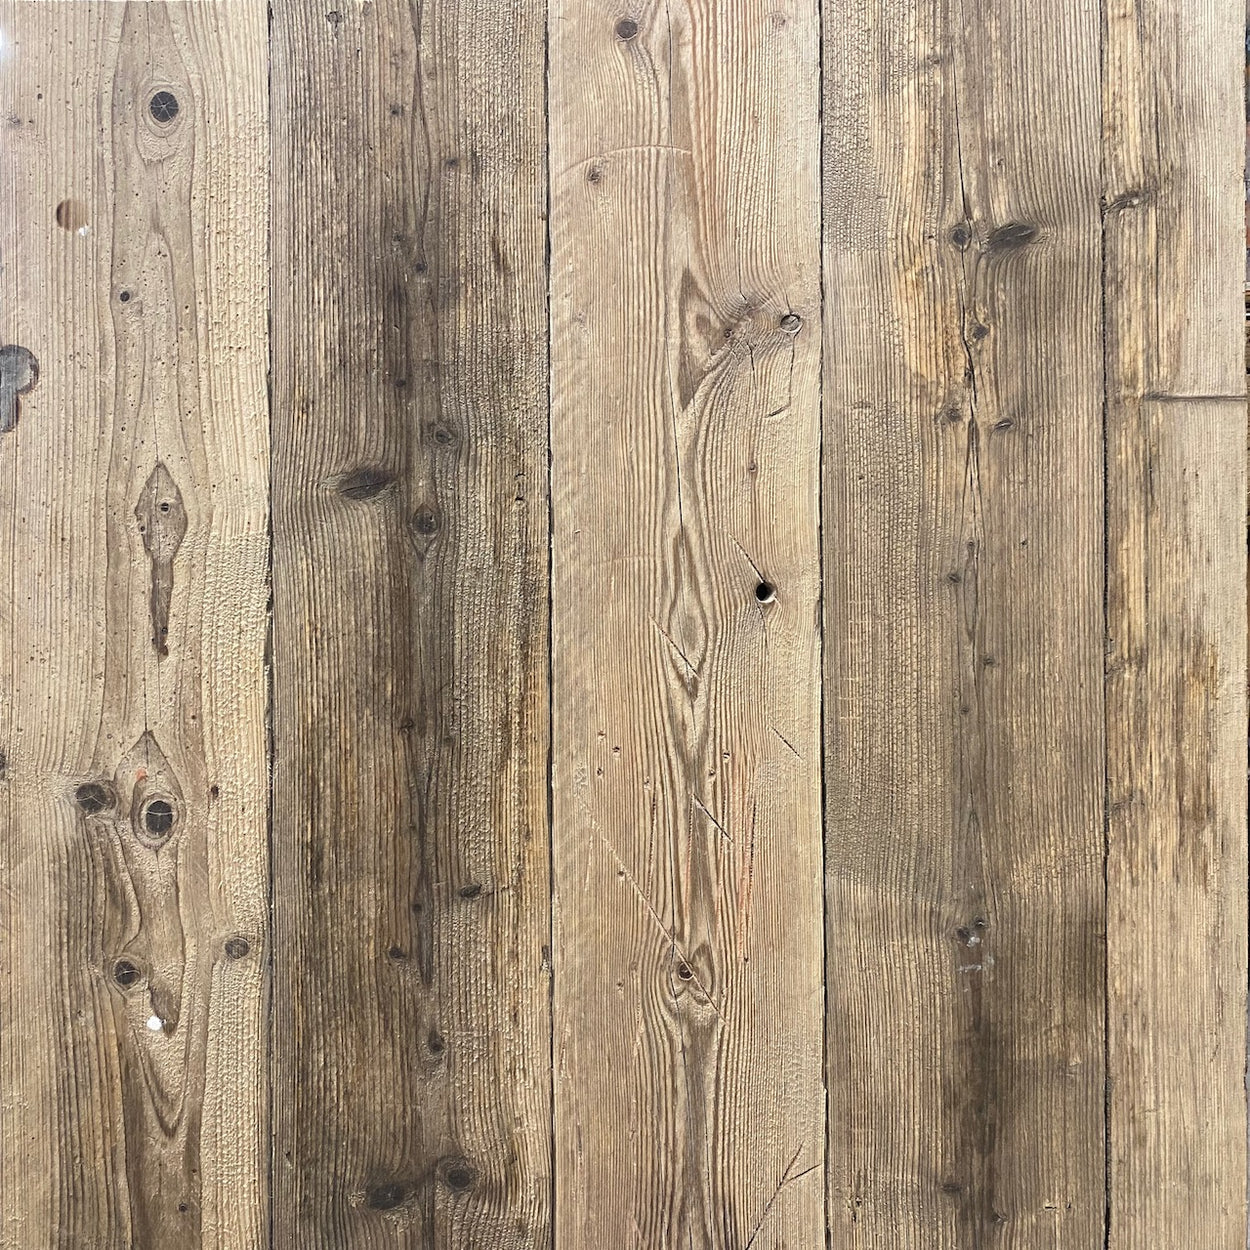 Sample of Reclaimed Natural Scaffold Boards